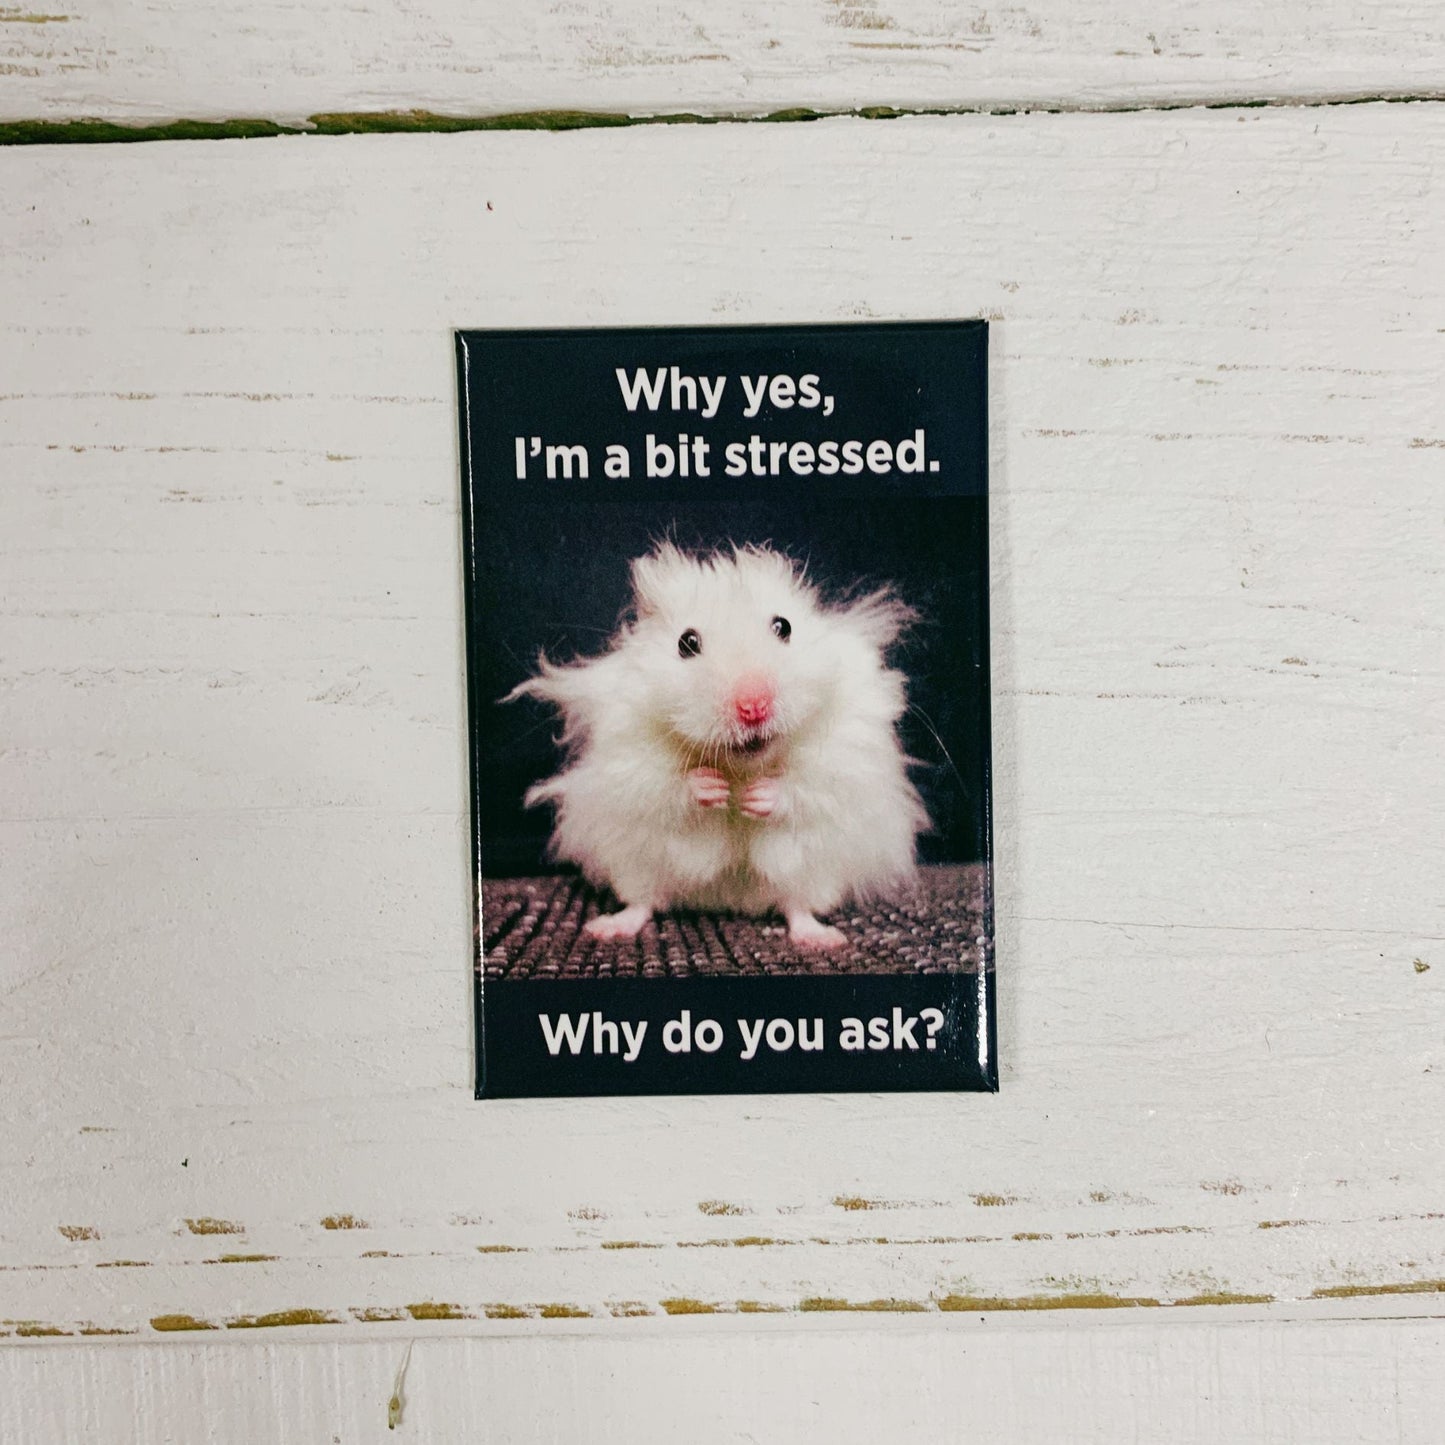 Why Yes, I'm a Bit Stressed. Why Do You Ask? Funny Hamster Rectangular Magnet | Fridge Magnetic Surface Decor | 3" x 2"